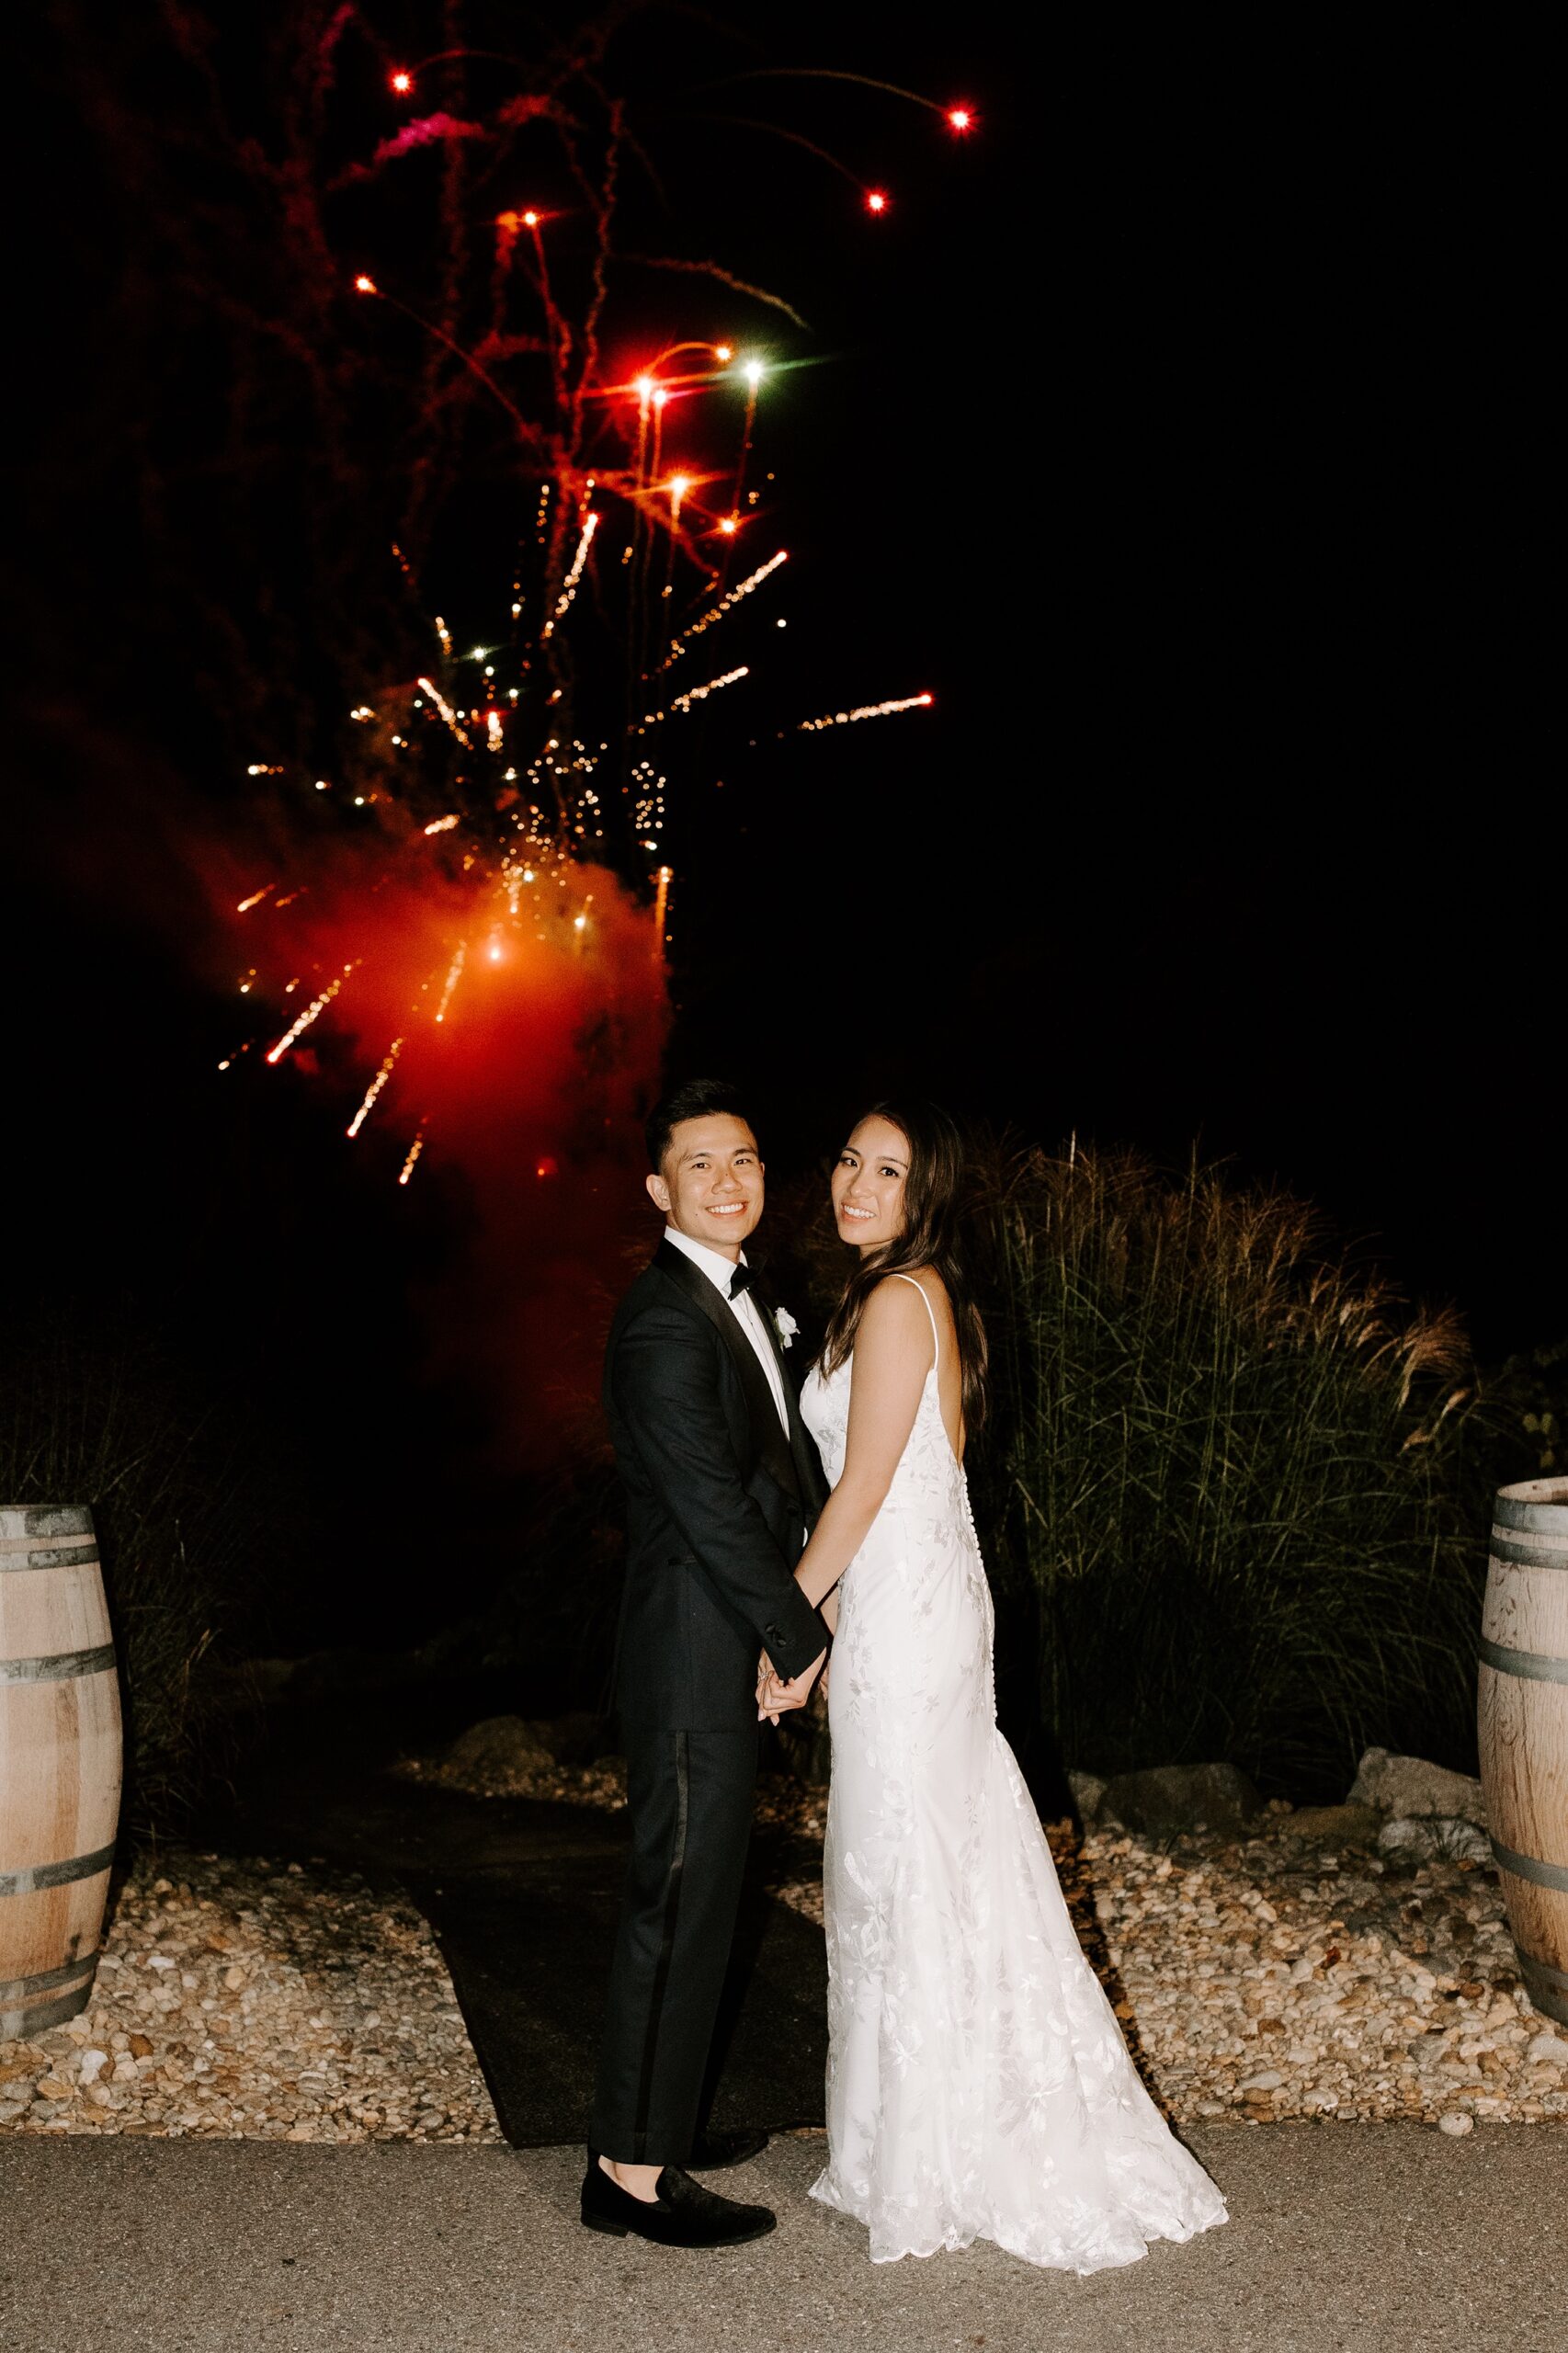 Bride and groom under fireworks at Labelle Winery wedding